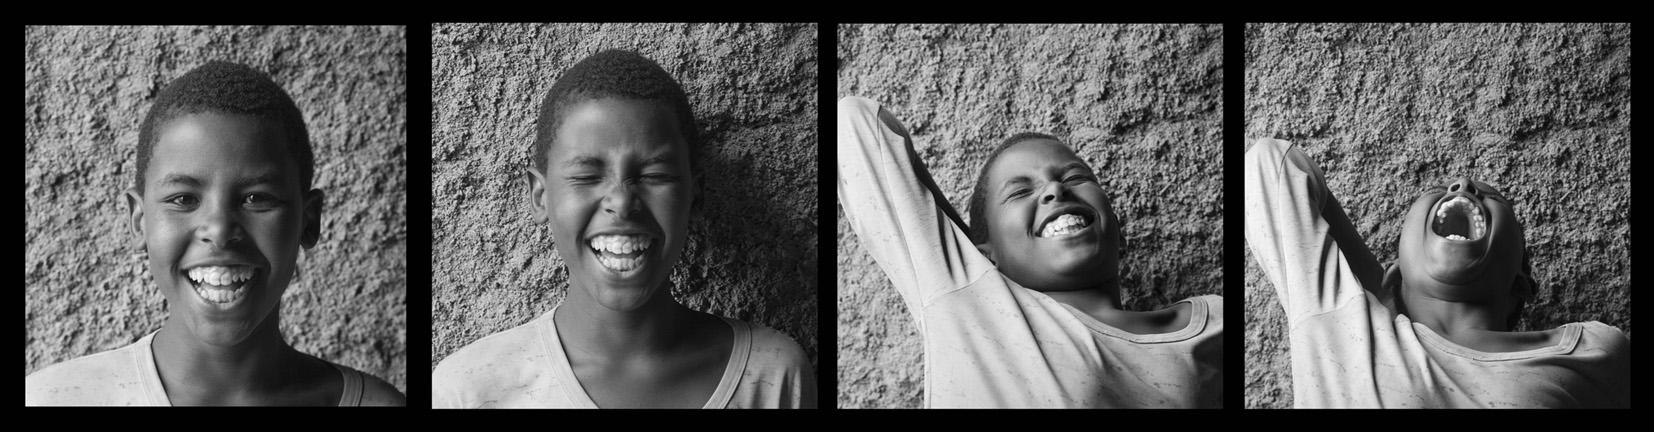 Images for Humanitarian Organizations -   Bereket Wolde, 11, one of 7 siblings, dropped out of...